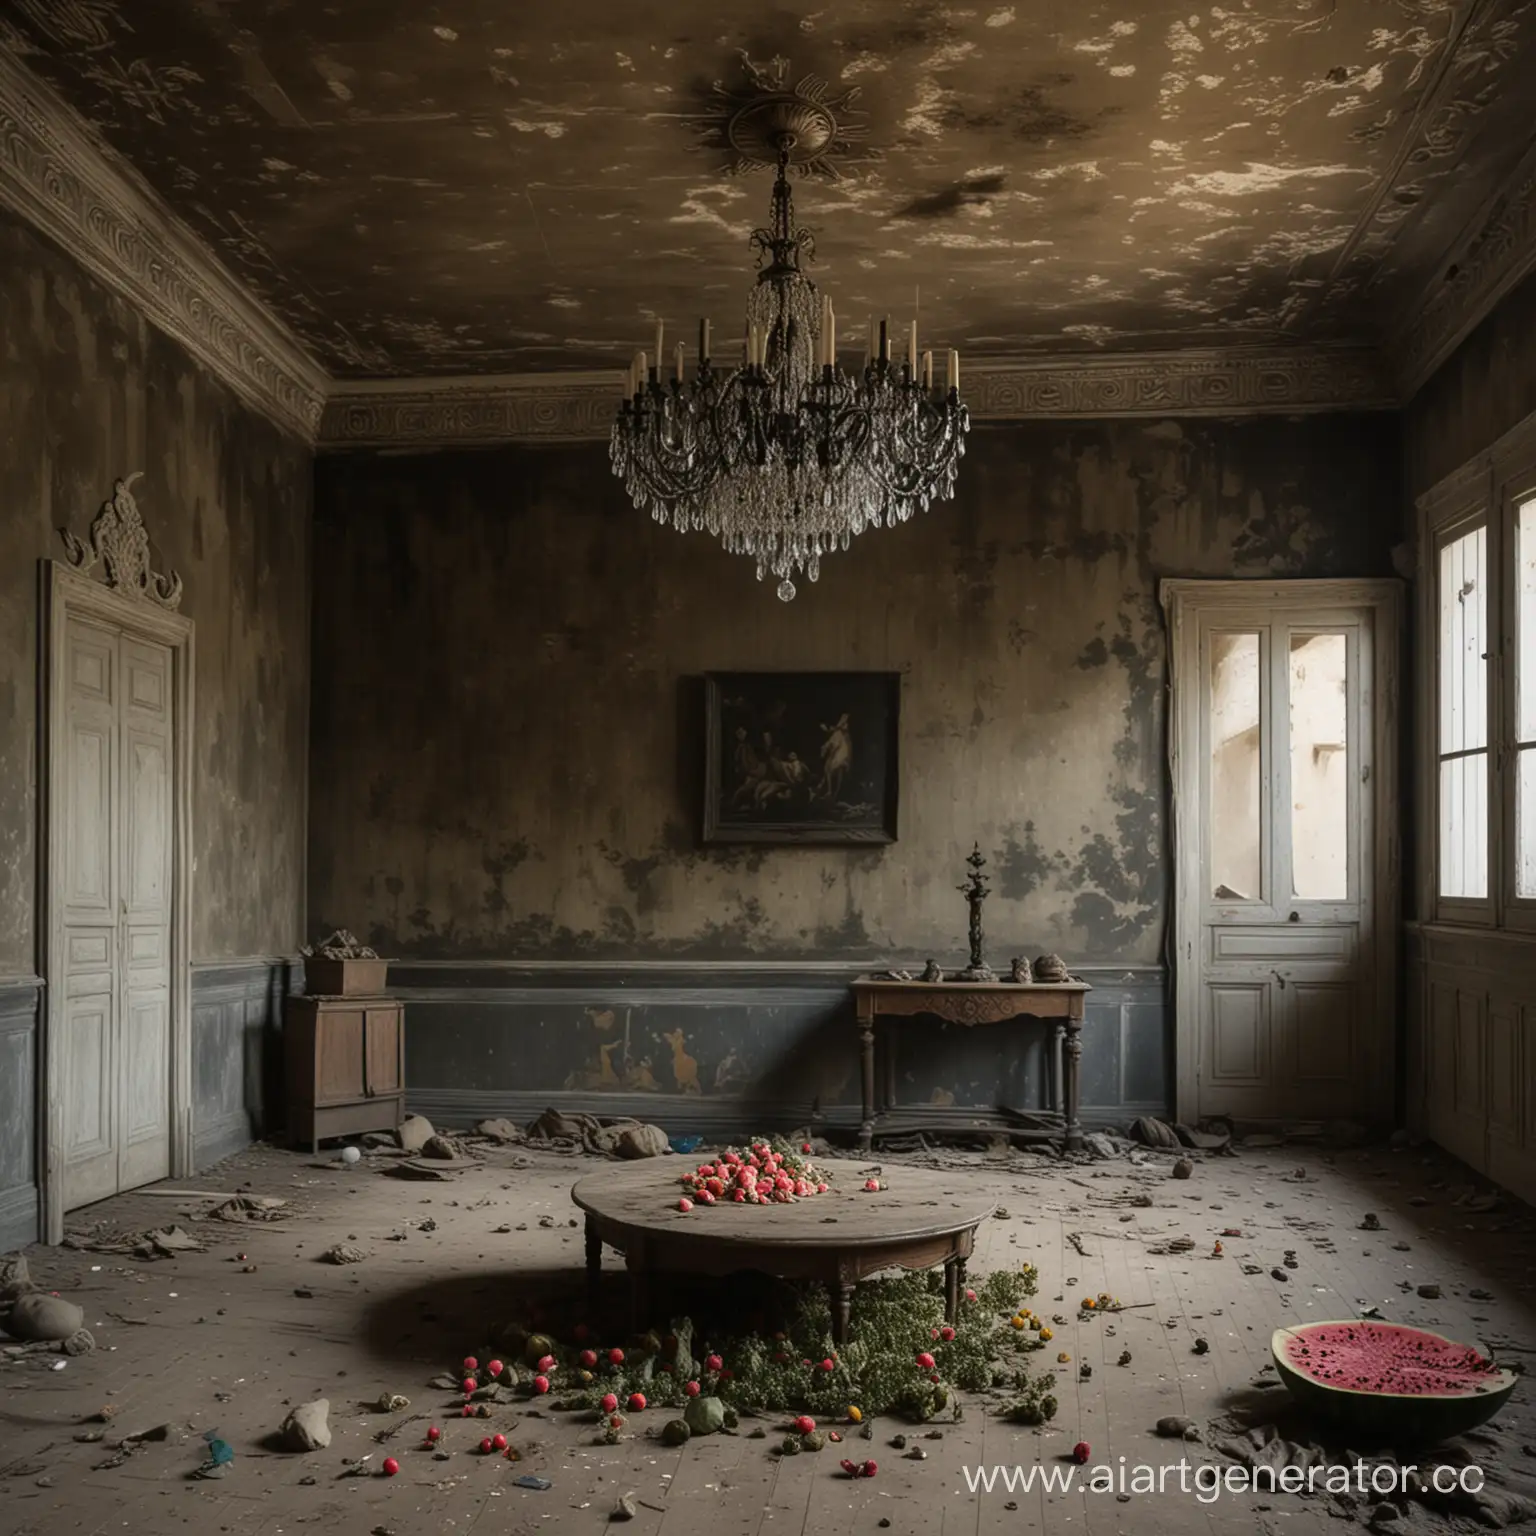 Forgotten-Room-with-Dusty-Chandelier-and-WornOut-Hat